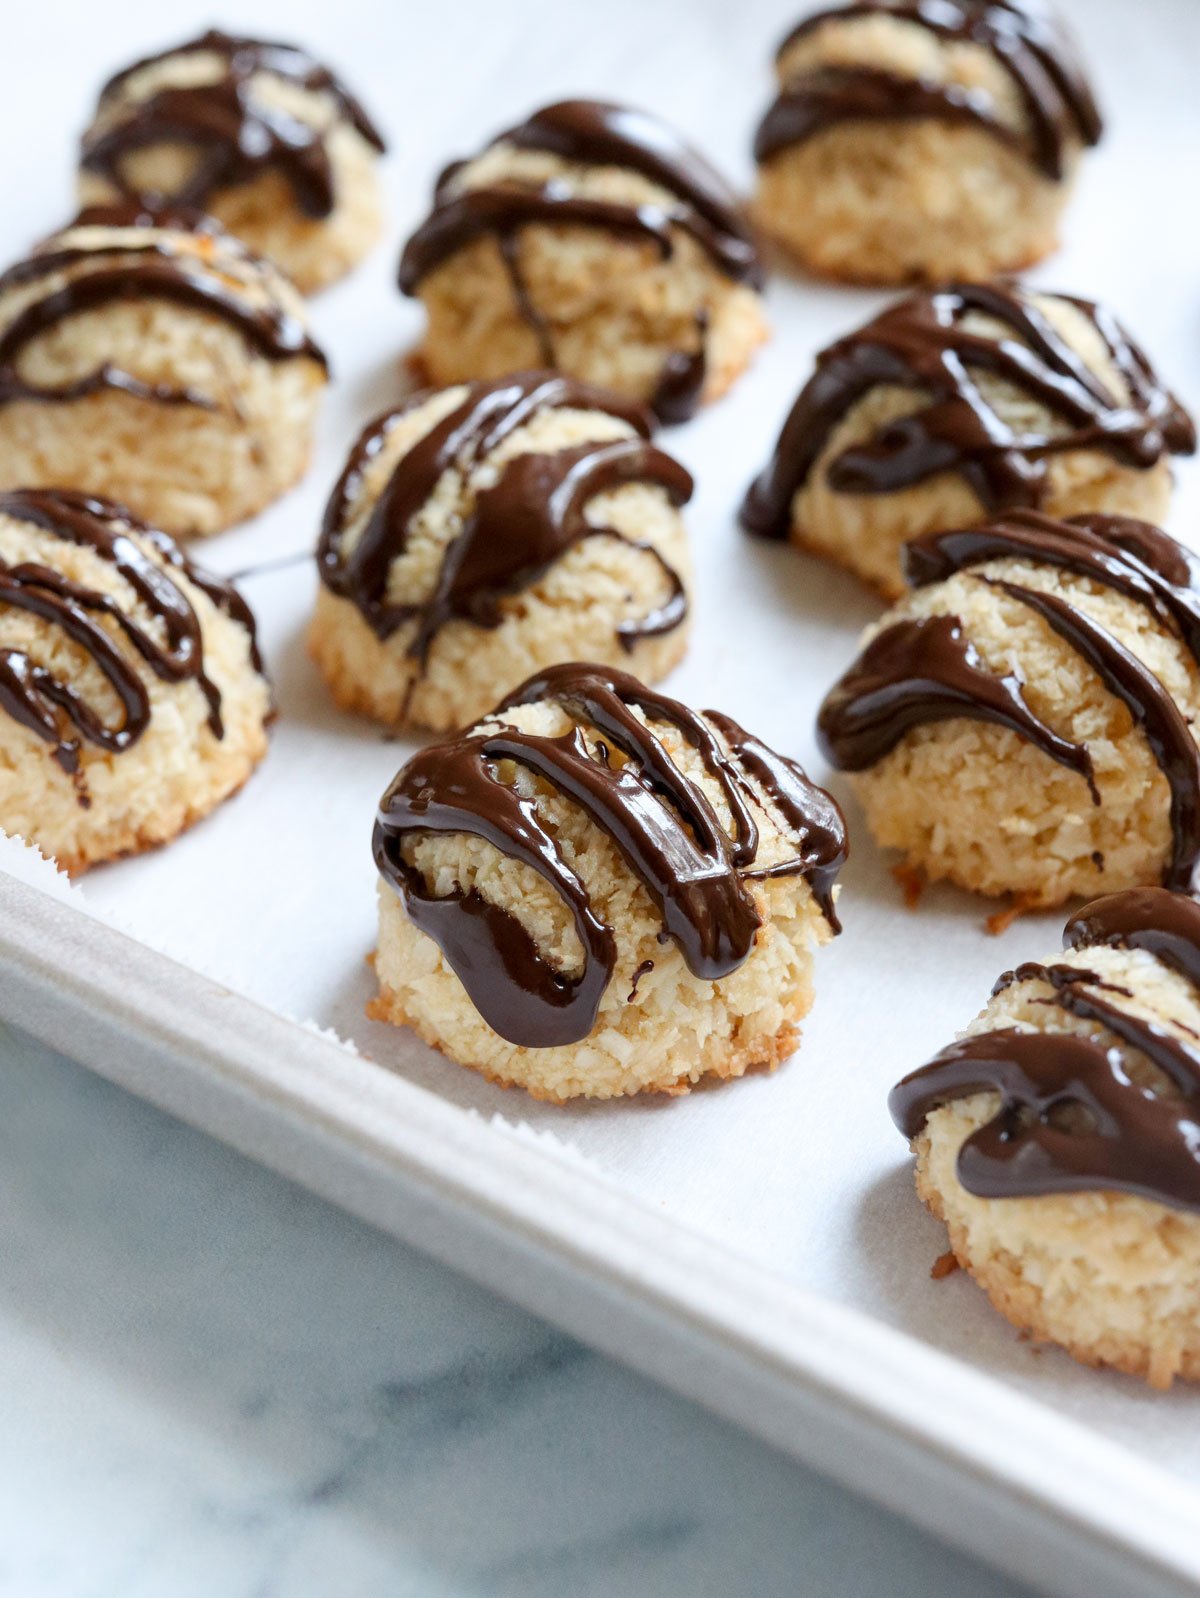 coconut macaroons with chocolate on top